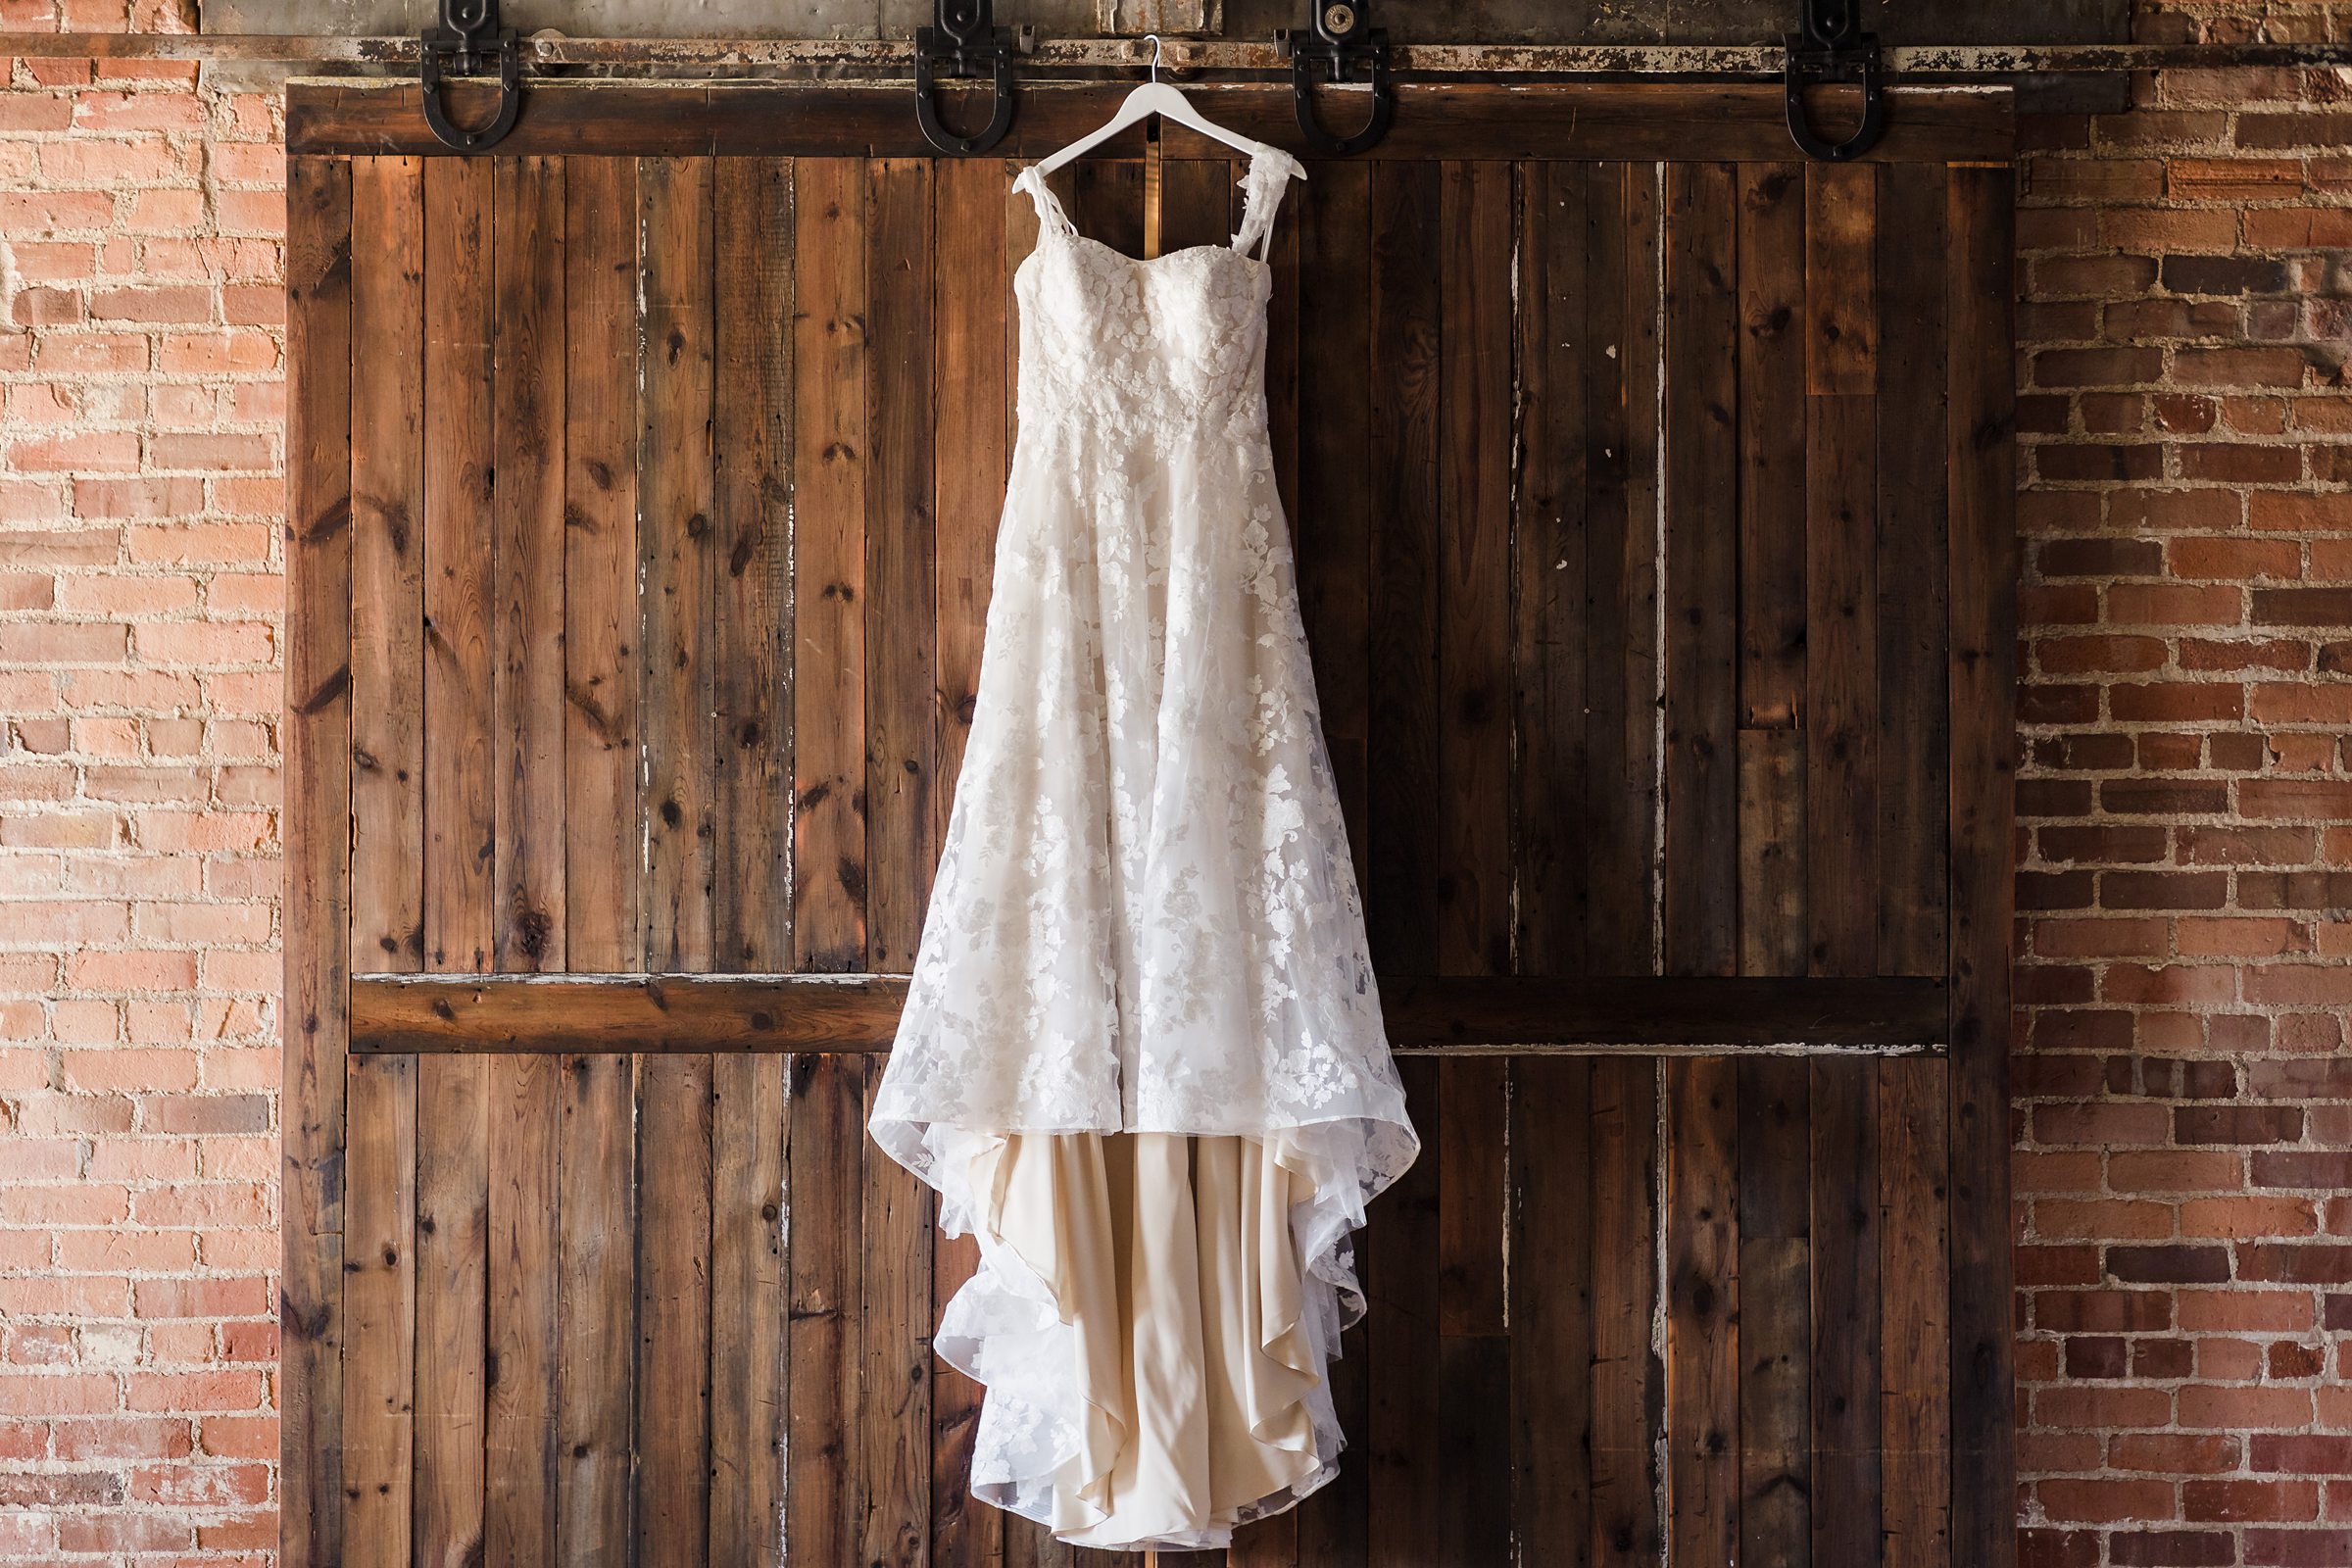 Wedding dress at the Trailside Event Center in Peoria Heights, Illinois.